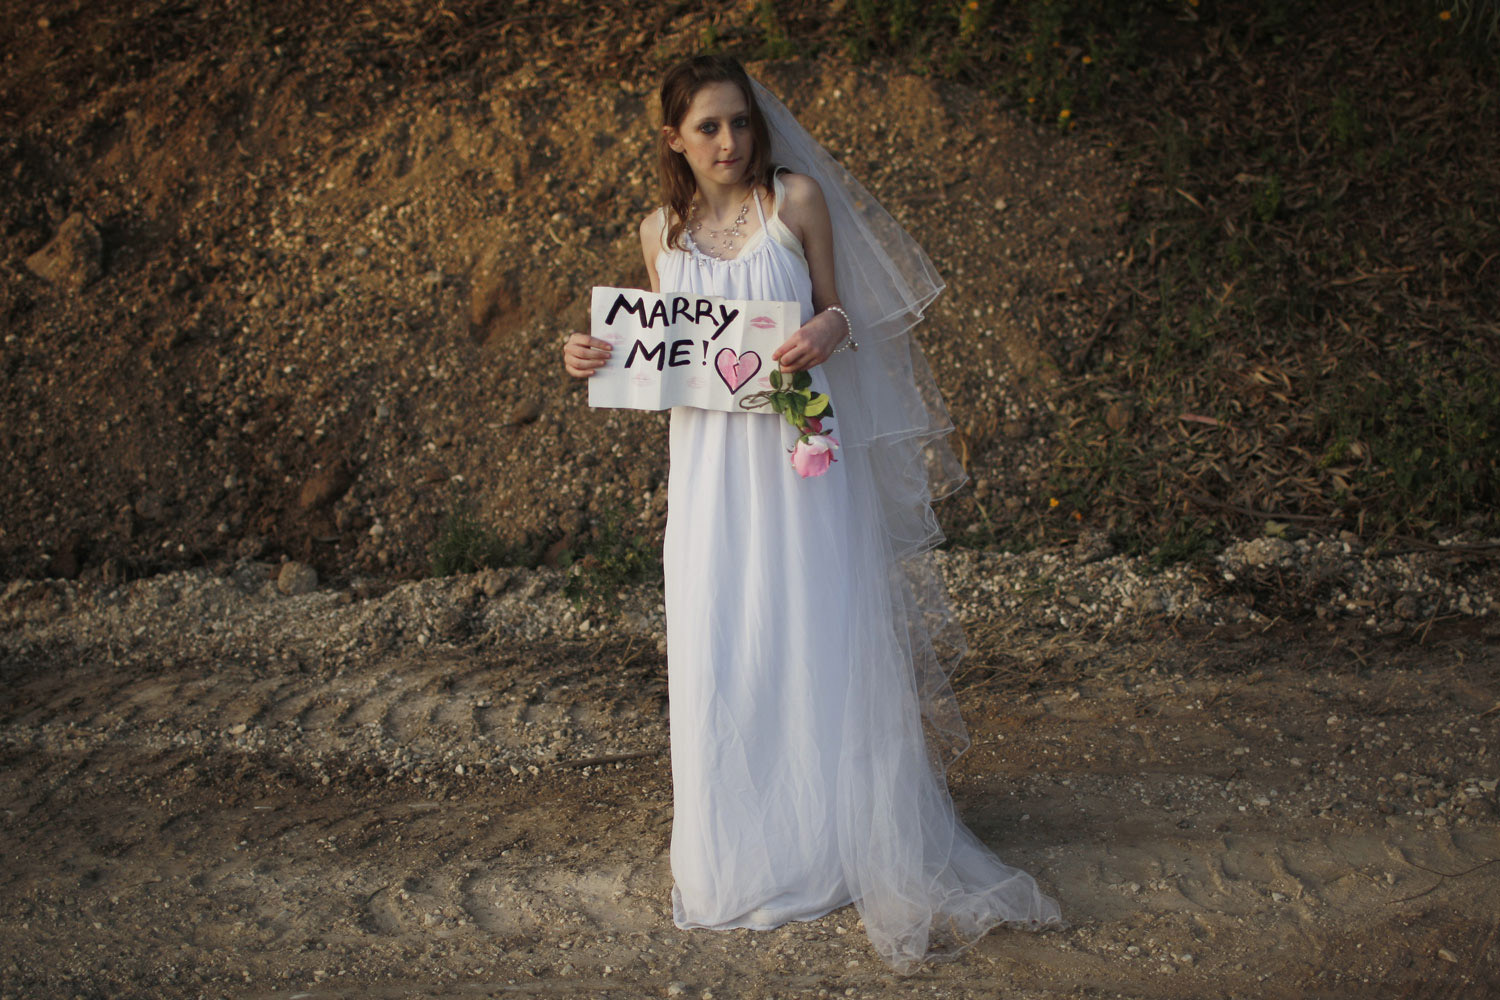 Hallel Goldamna, 13, wears a wedding dress as she holds a sign for Canadian singer Justin Bieber ahead of his concert in Tel Aviv. April 14, 2011